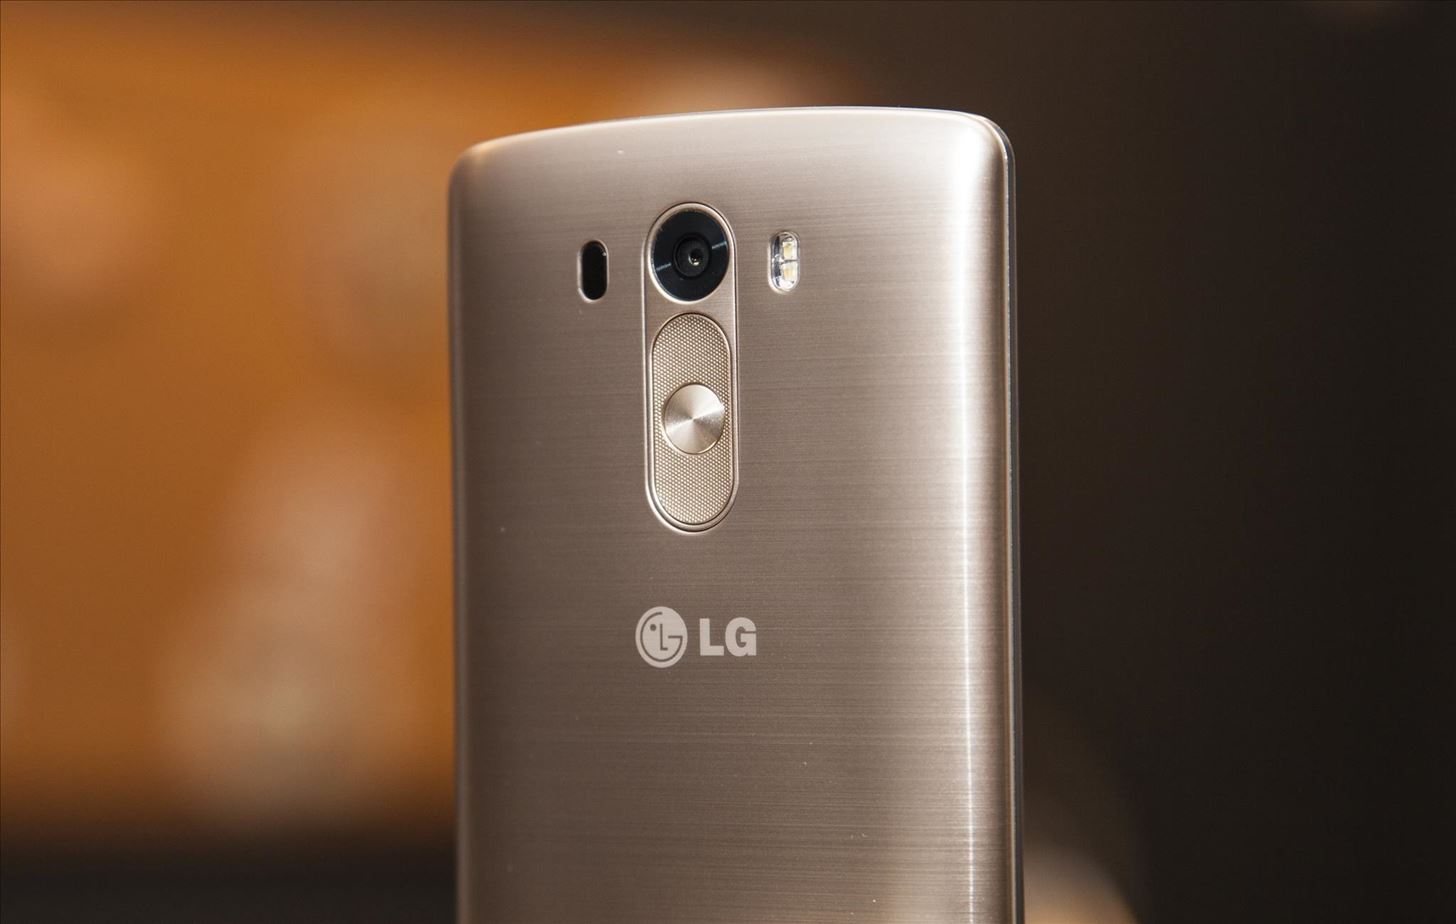 How to Speed Up Your LG G3 in 10 Seconds Flat